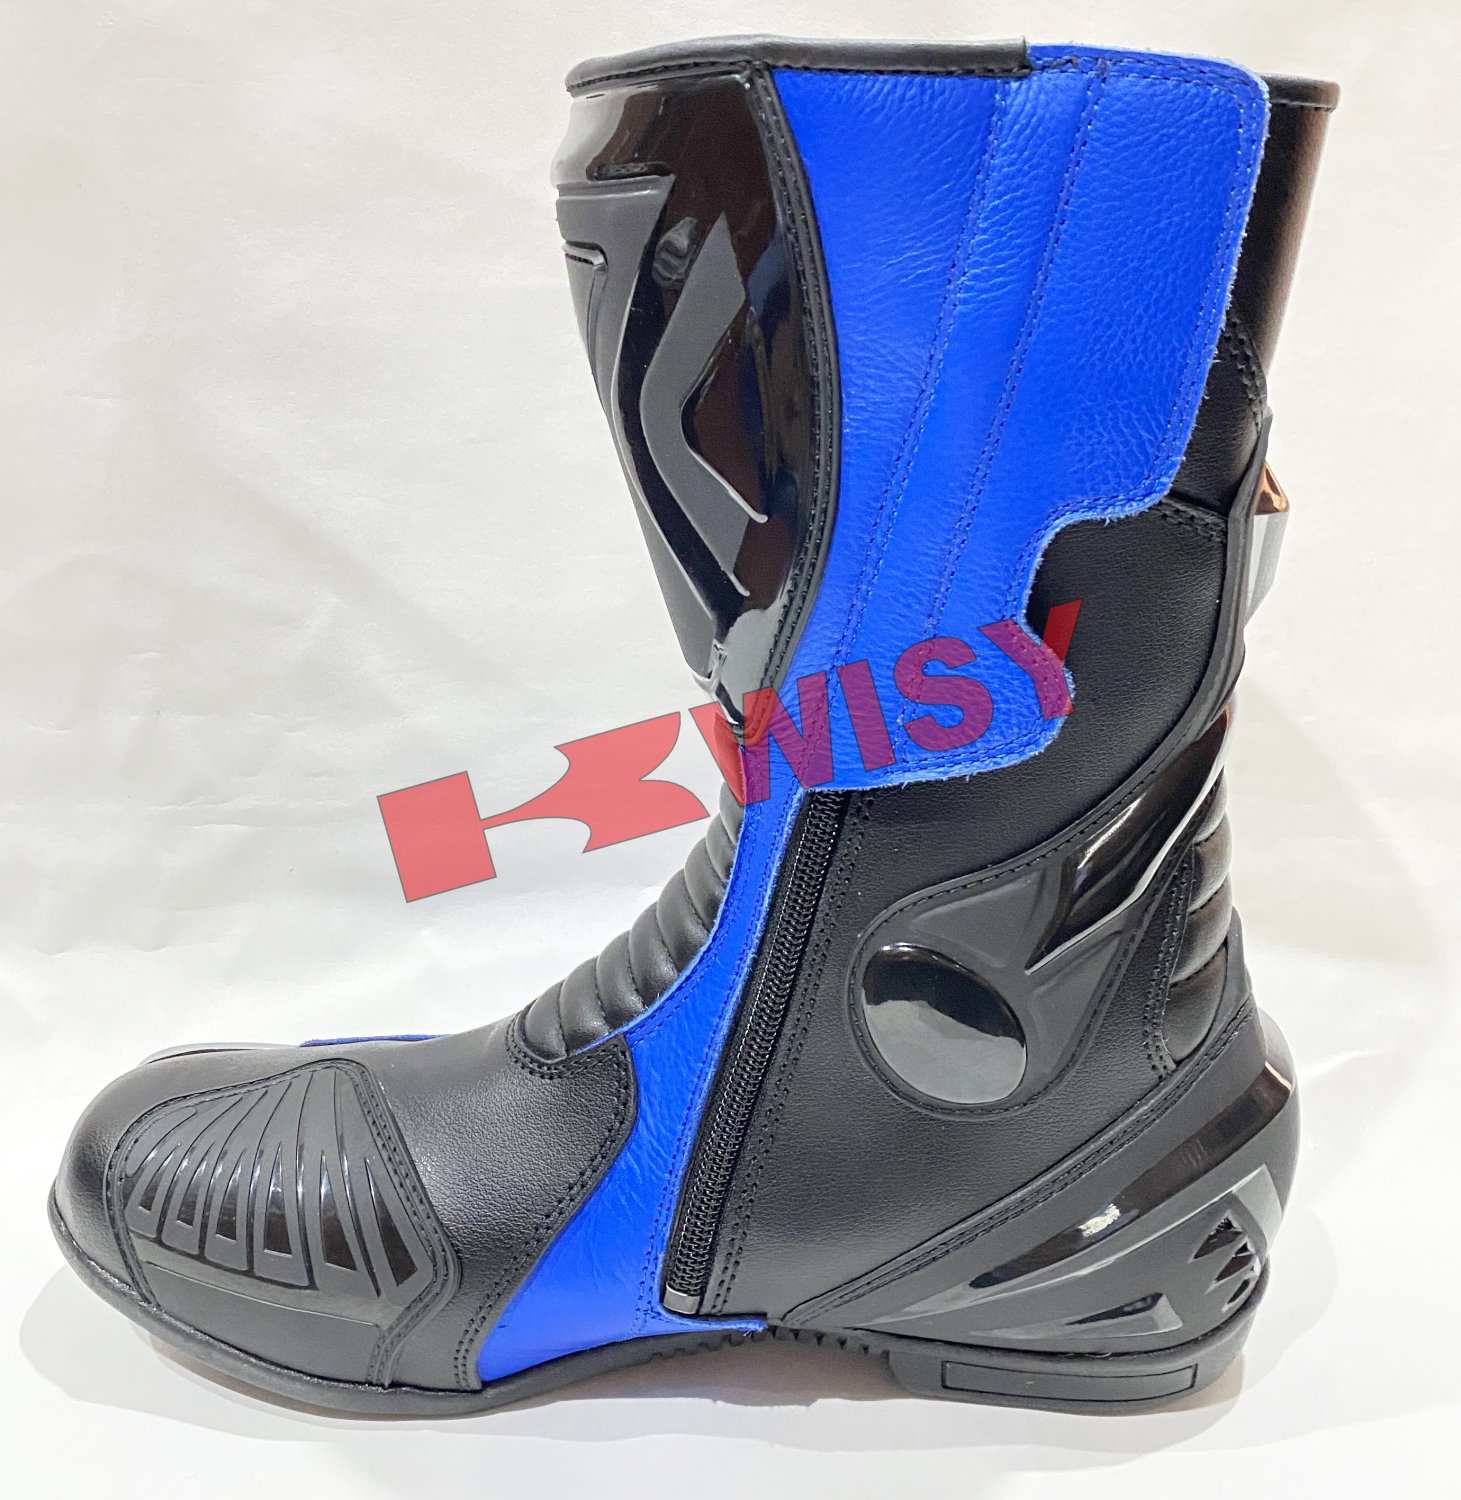 Dainese Motorbike Racing Shoes Motorcycle Boots High quality Leather ...